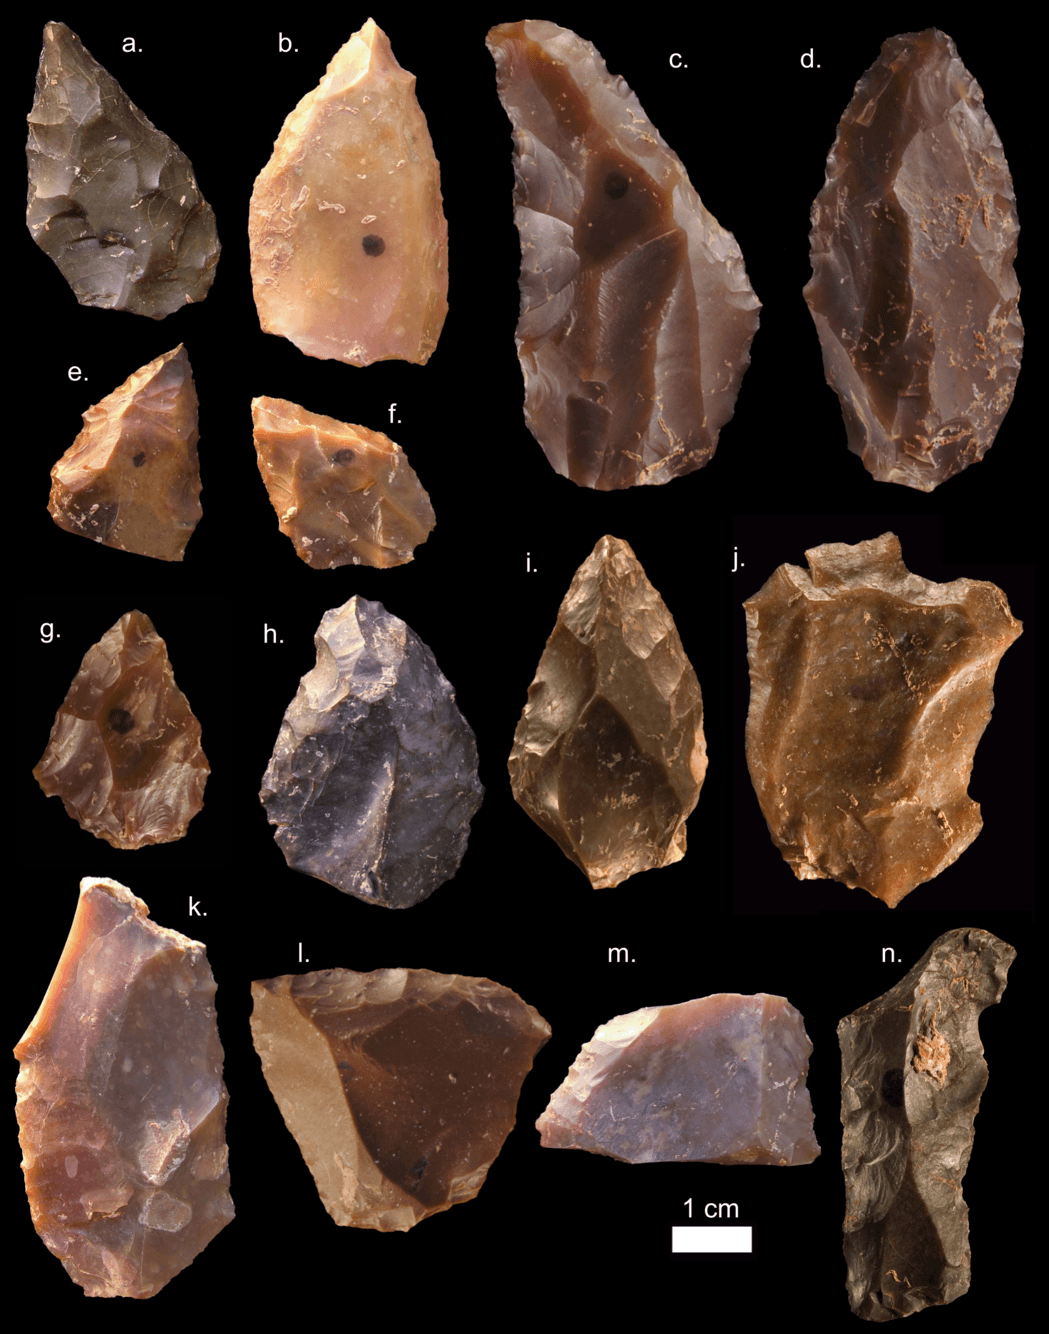 Some of the Middle Stone Age stone tools from Jebel Irhoud (Morocco)